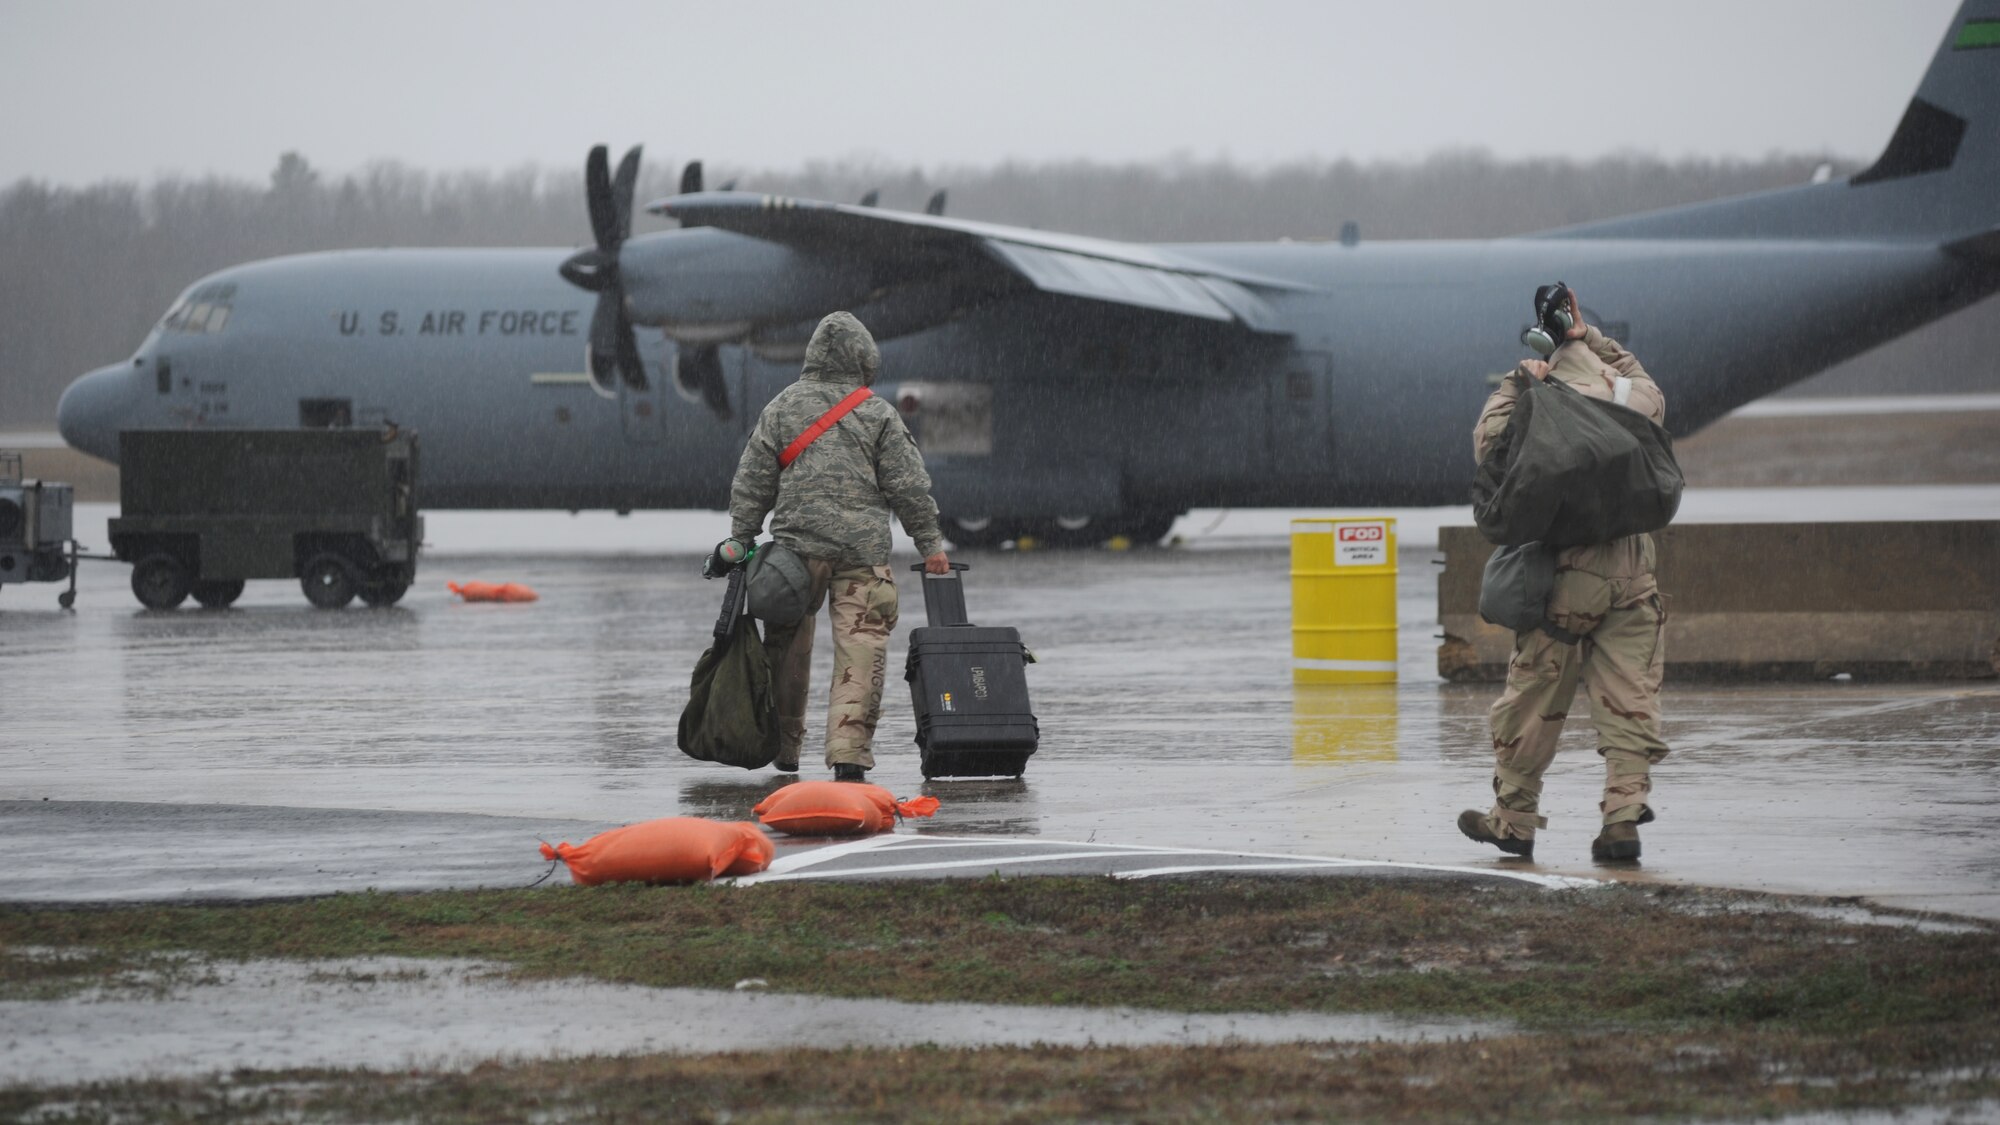 Two males are pictured walking toward an aircraft in the rain.